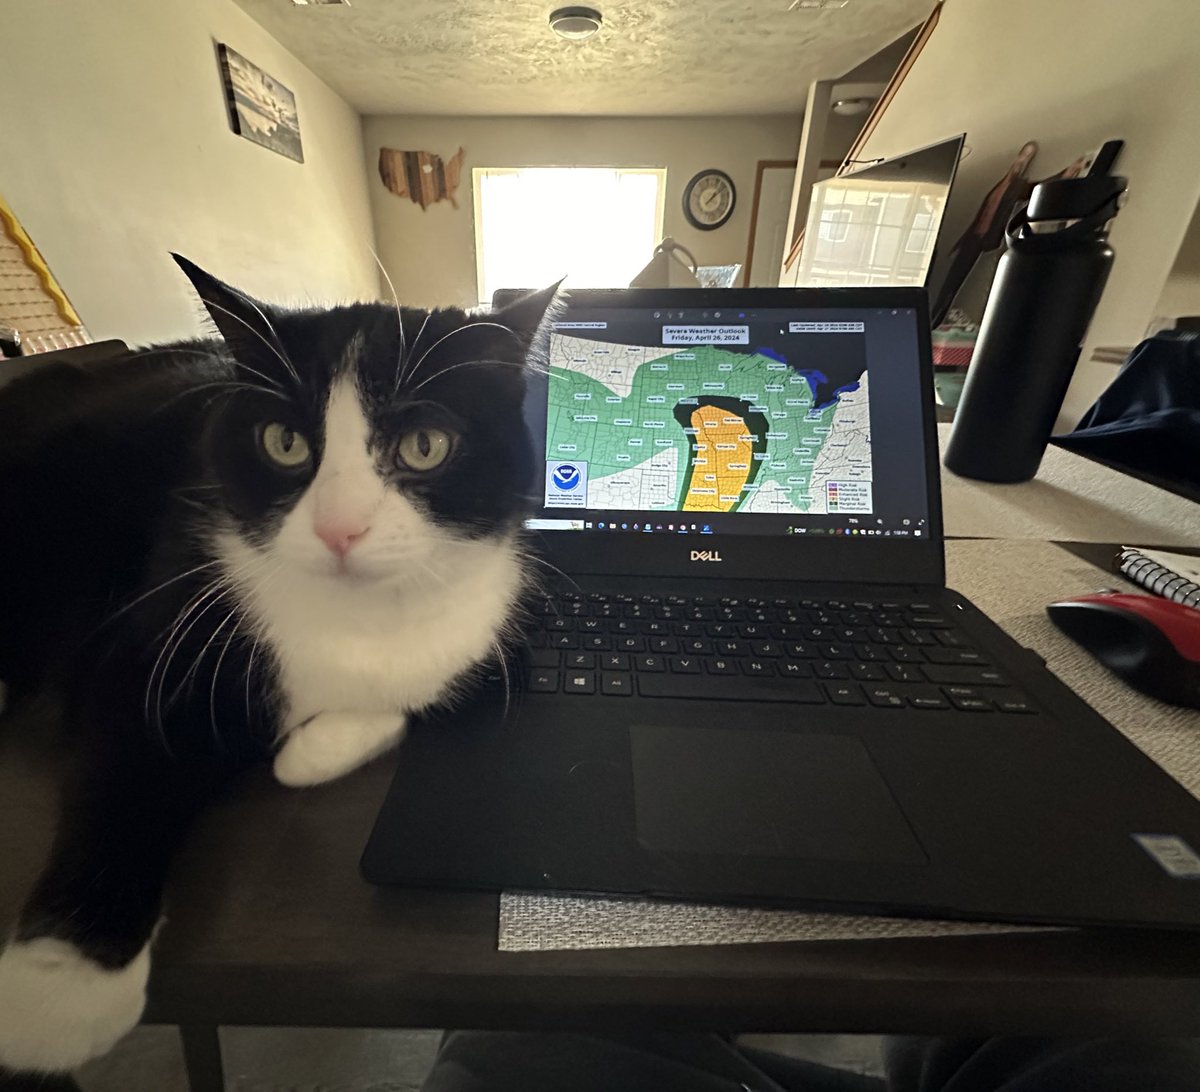 My oldest cat wanted to assist with the forecasting today.